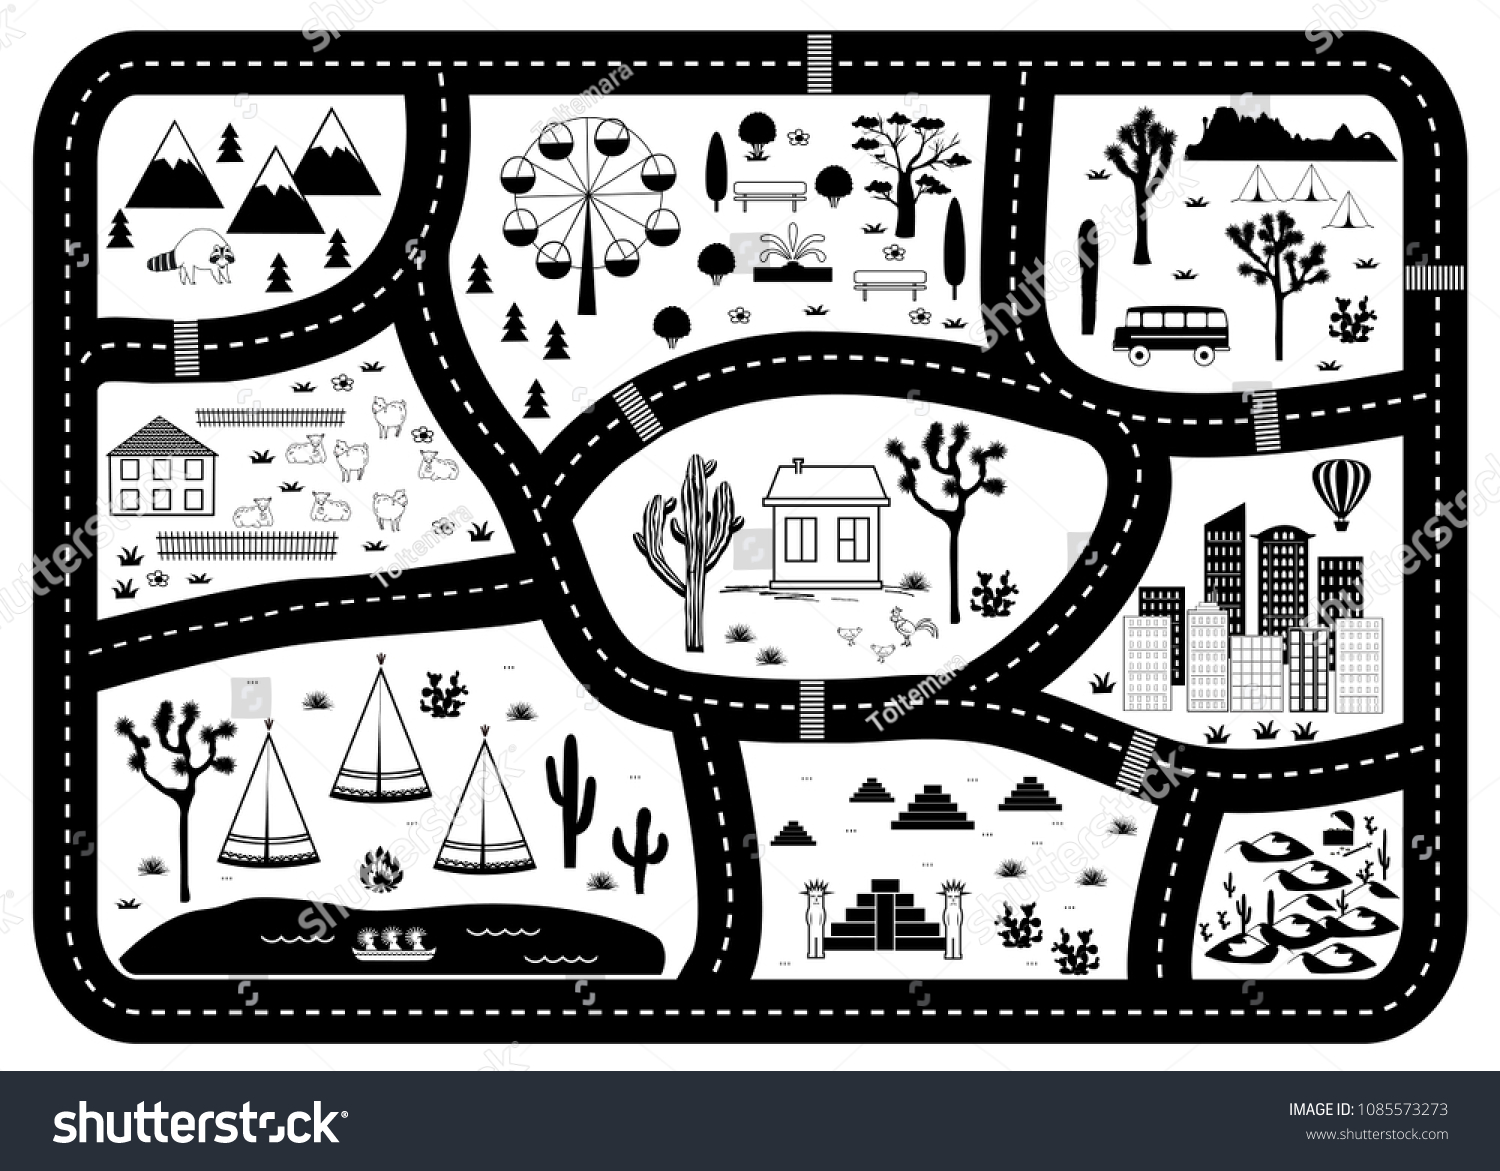 Road, Mountains and Woods Adventure Map. Kids play carpet or poster with native americans tribal elements. Trendy black and white Scandinavian Style. Vector illustration #1085573273